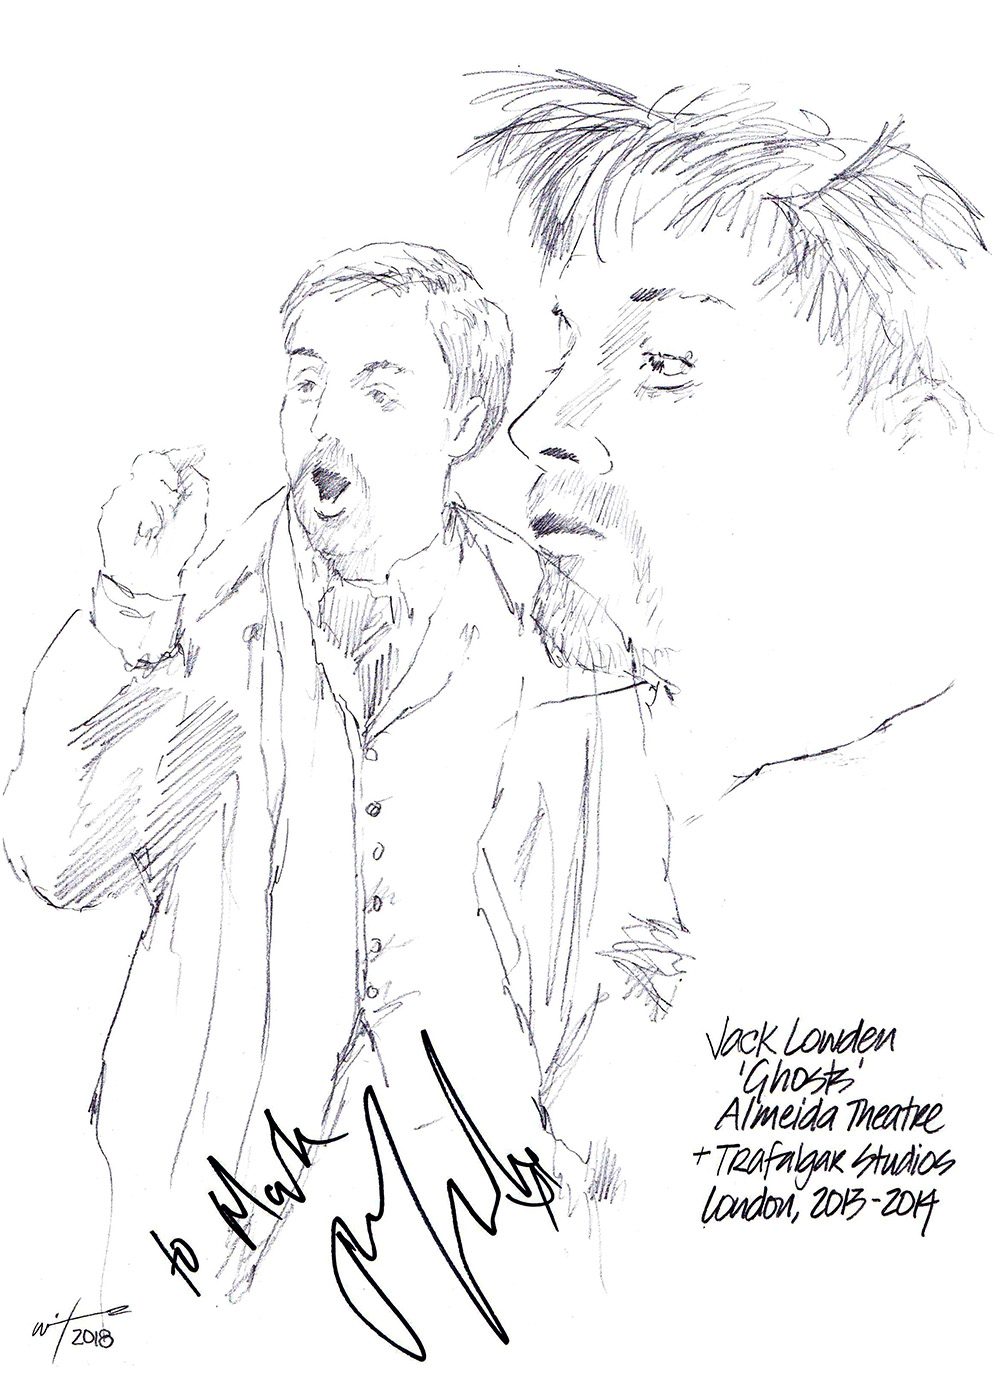 Autographed drawing of Jack Lowden in Ghosts at the Almeida Theatre and Trafalgar Studios on London's West End